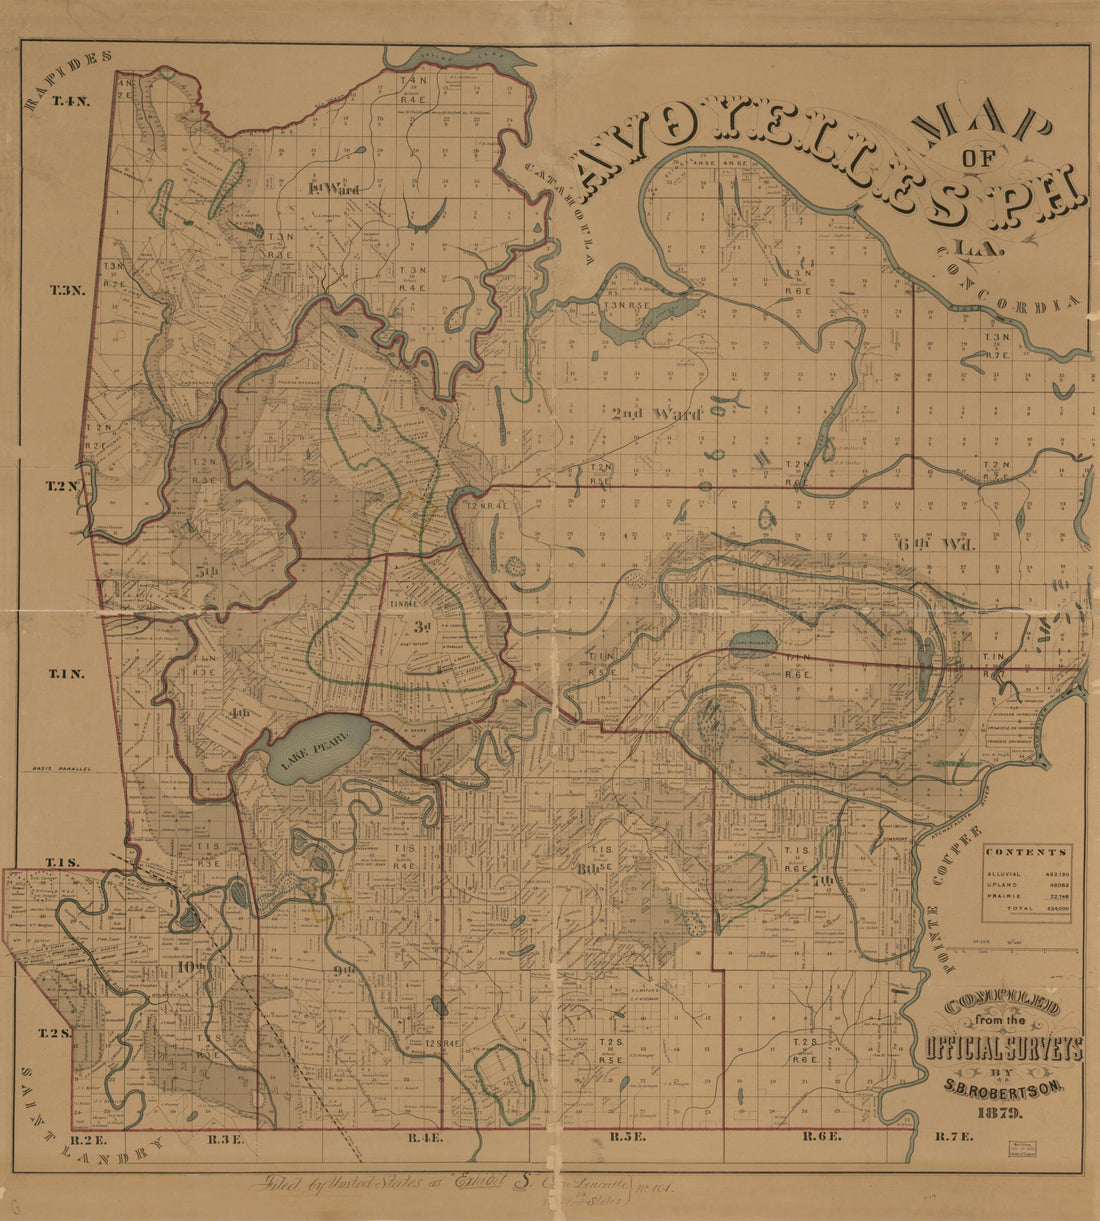 This old map of Map of Avoyelles Ph, La. (Map of Avoyelles Parish, Louisiana) from 1879 was created by S. B. Robertson in 1879